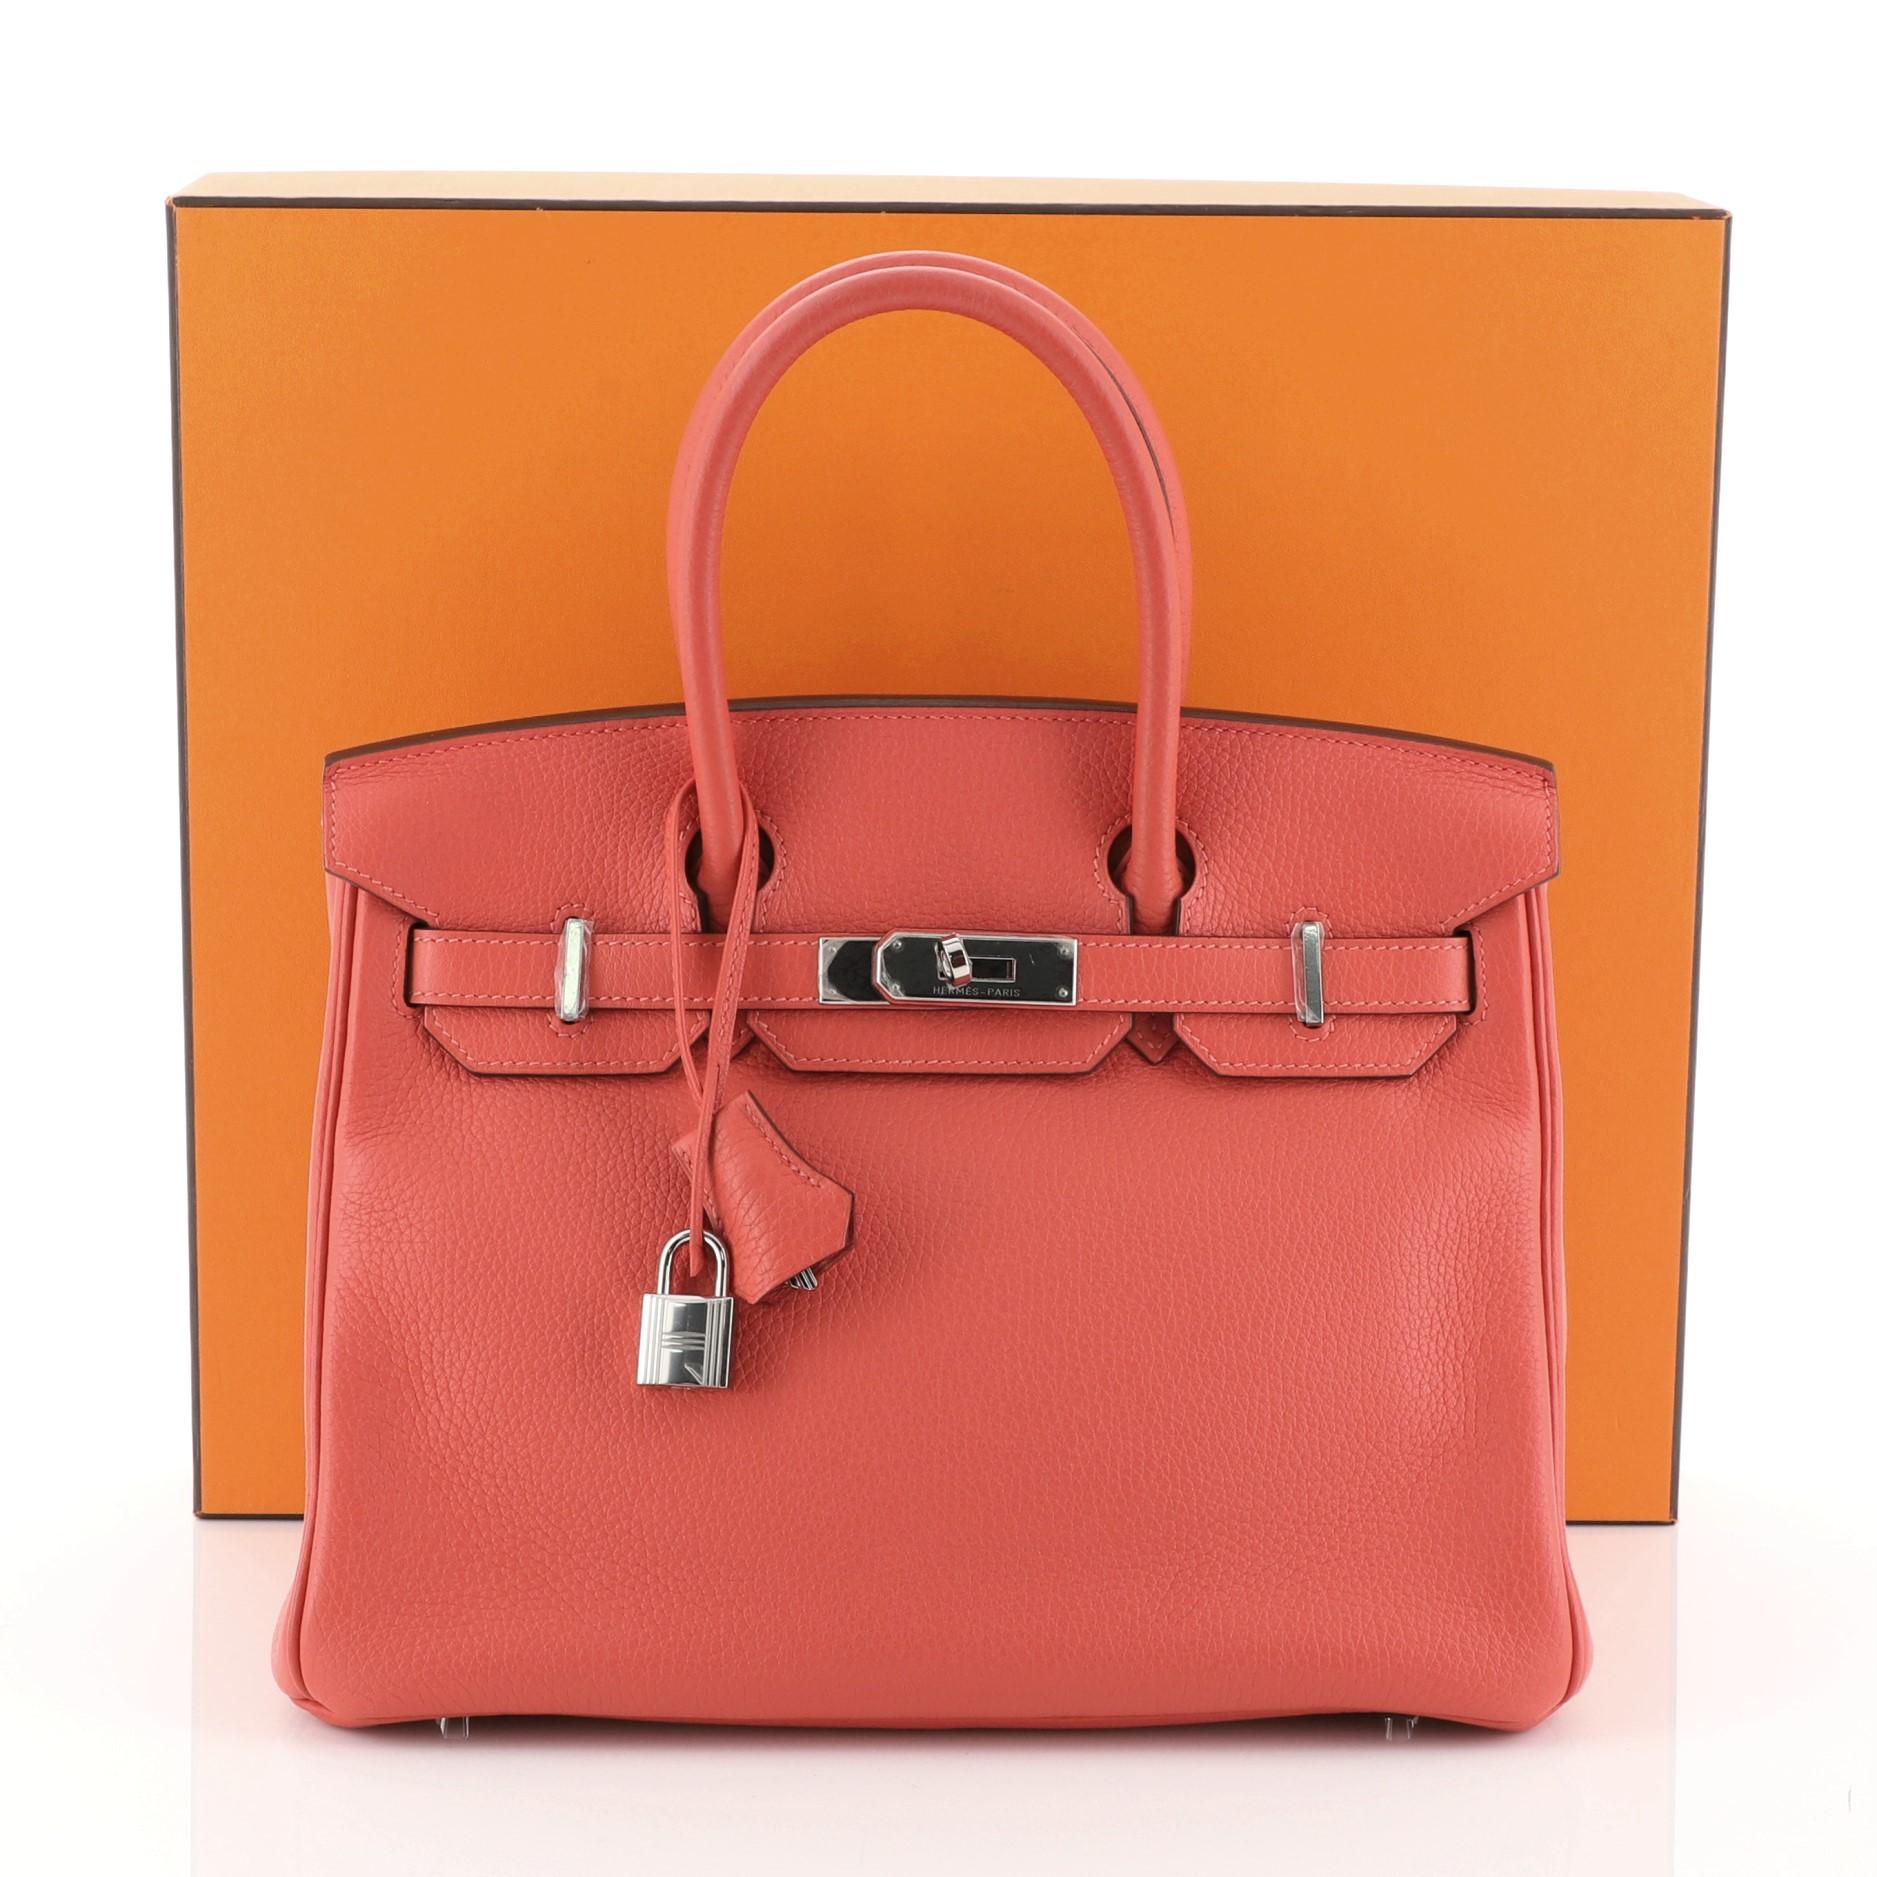 This Hermes Birkin Handbag Rouge Pivoine Clemence with Palladium Hardware 30, crafted in Rouge Pivoine red Clemence leather, features dual rolled handles, frontal flap, and palladium hardware. Its turn-lock closure opens to a Rouge Pivoine red